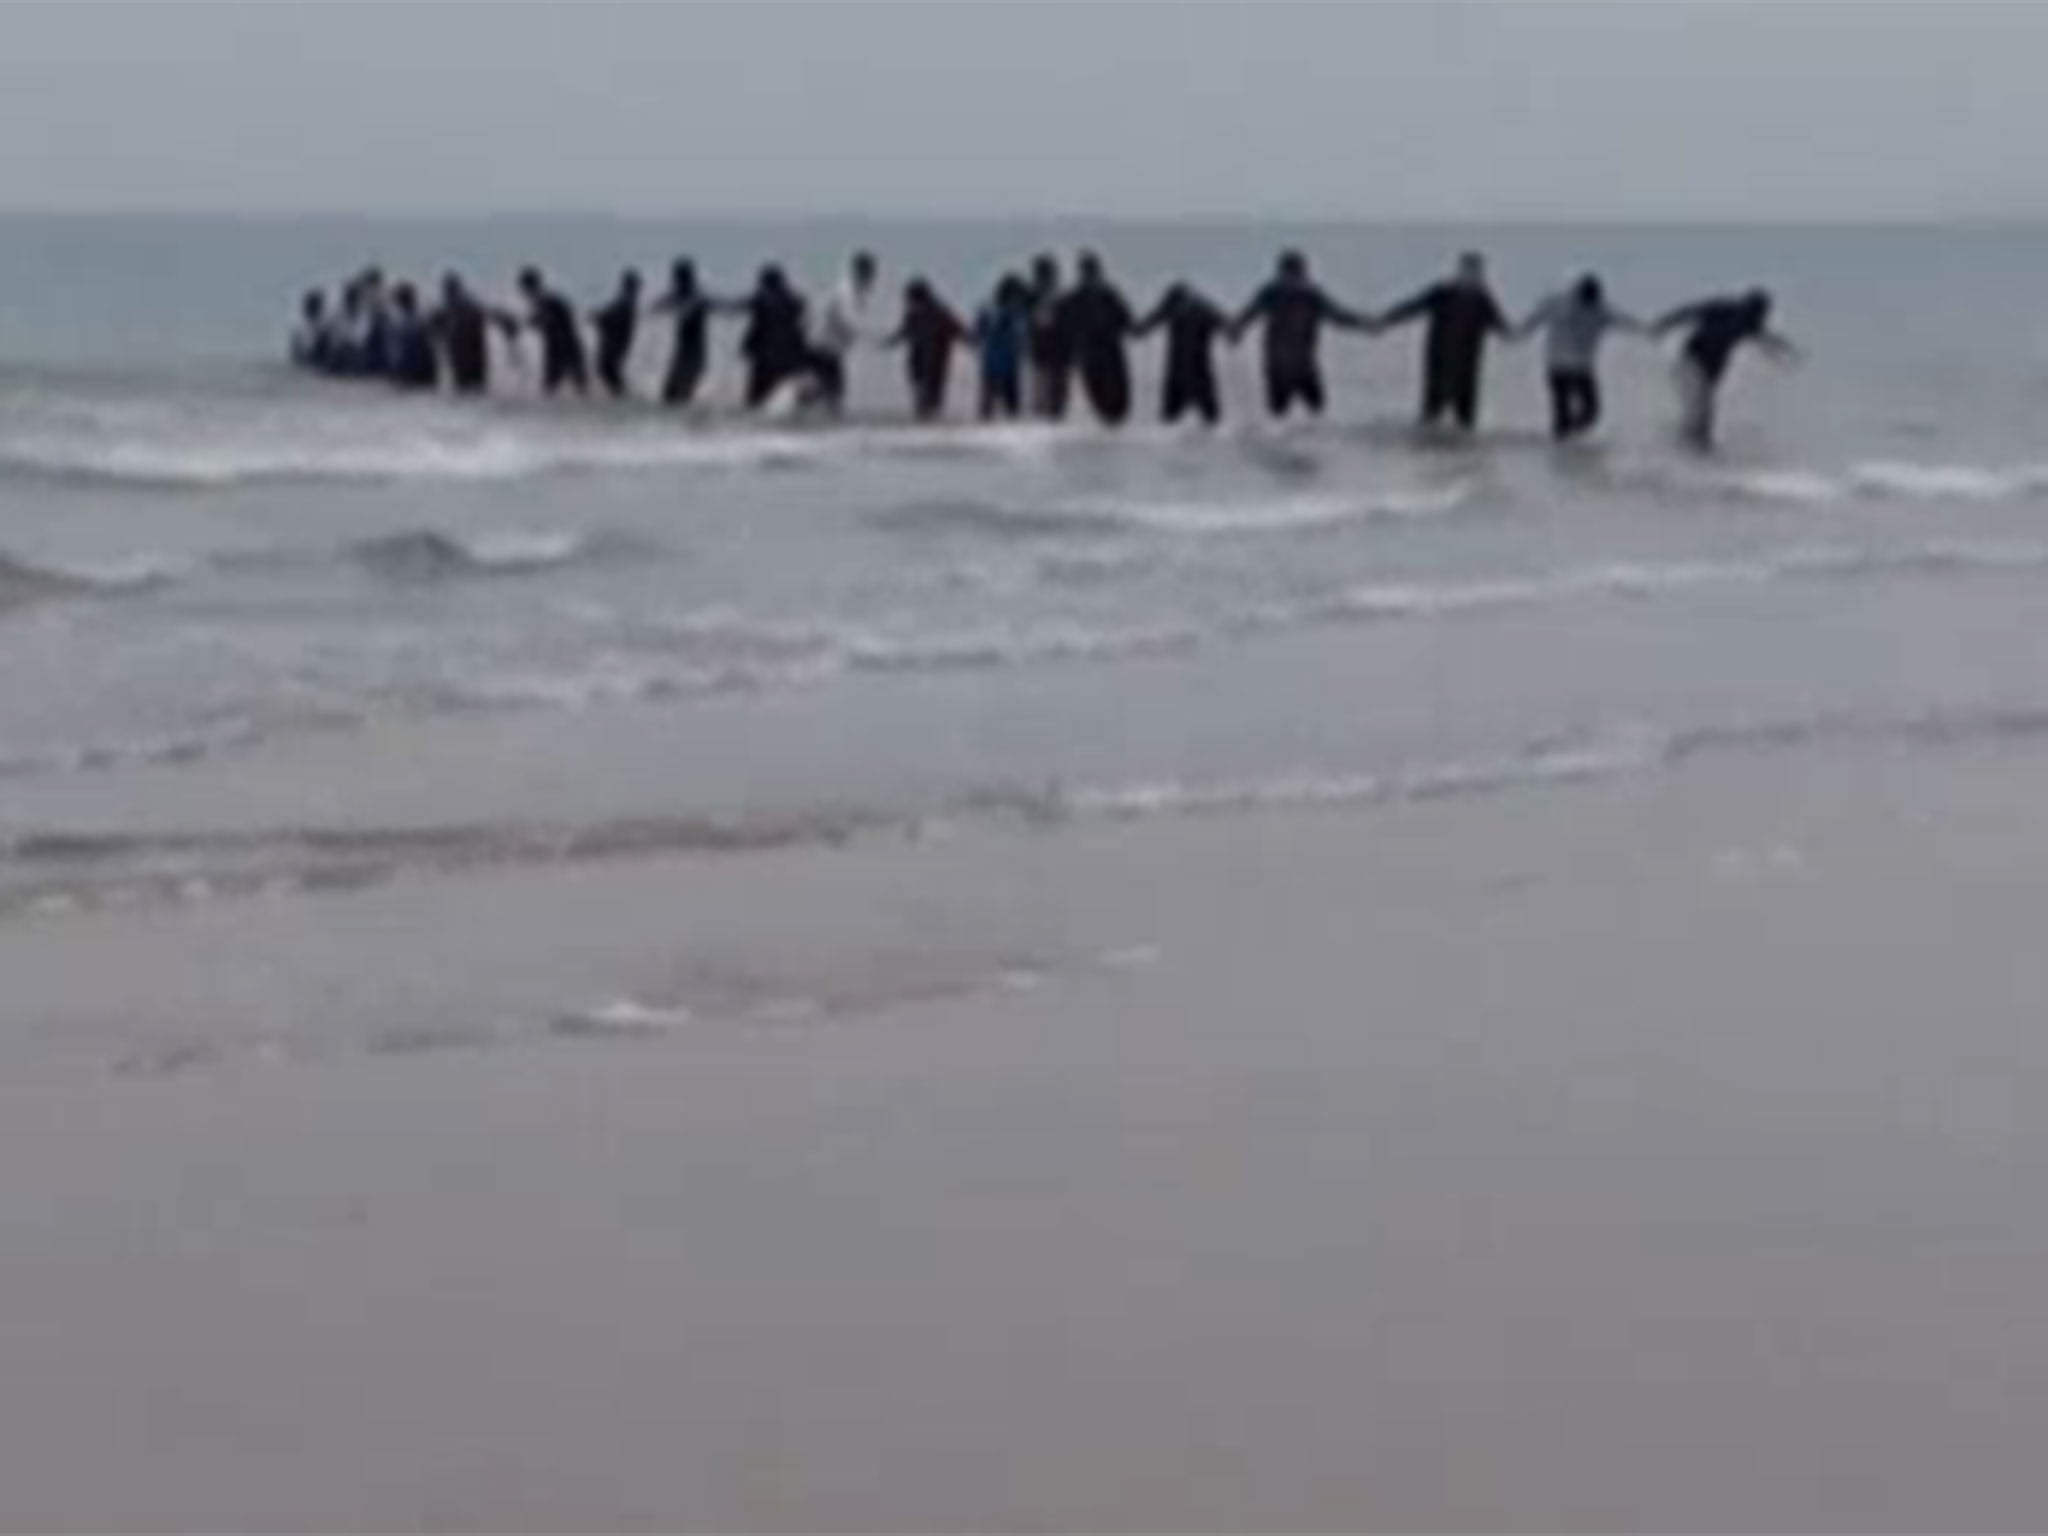 University students in China have rescued a woman who was apparently attempting to commit suicide in freezing sea water by forming a human chain.